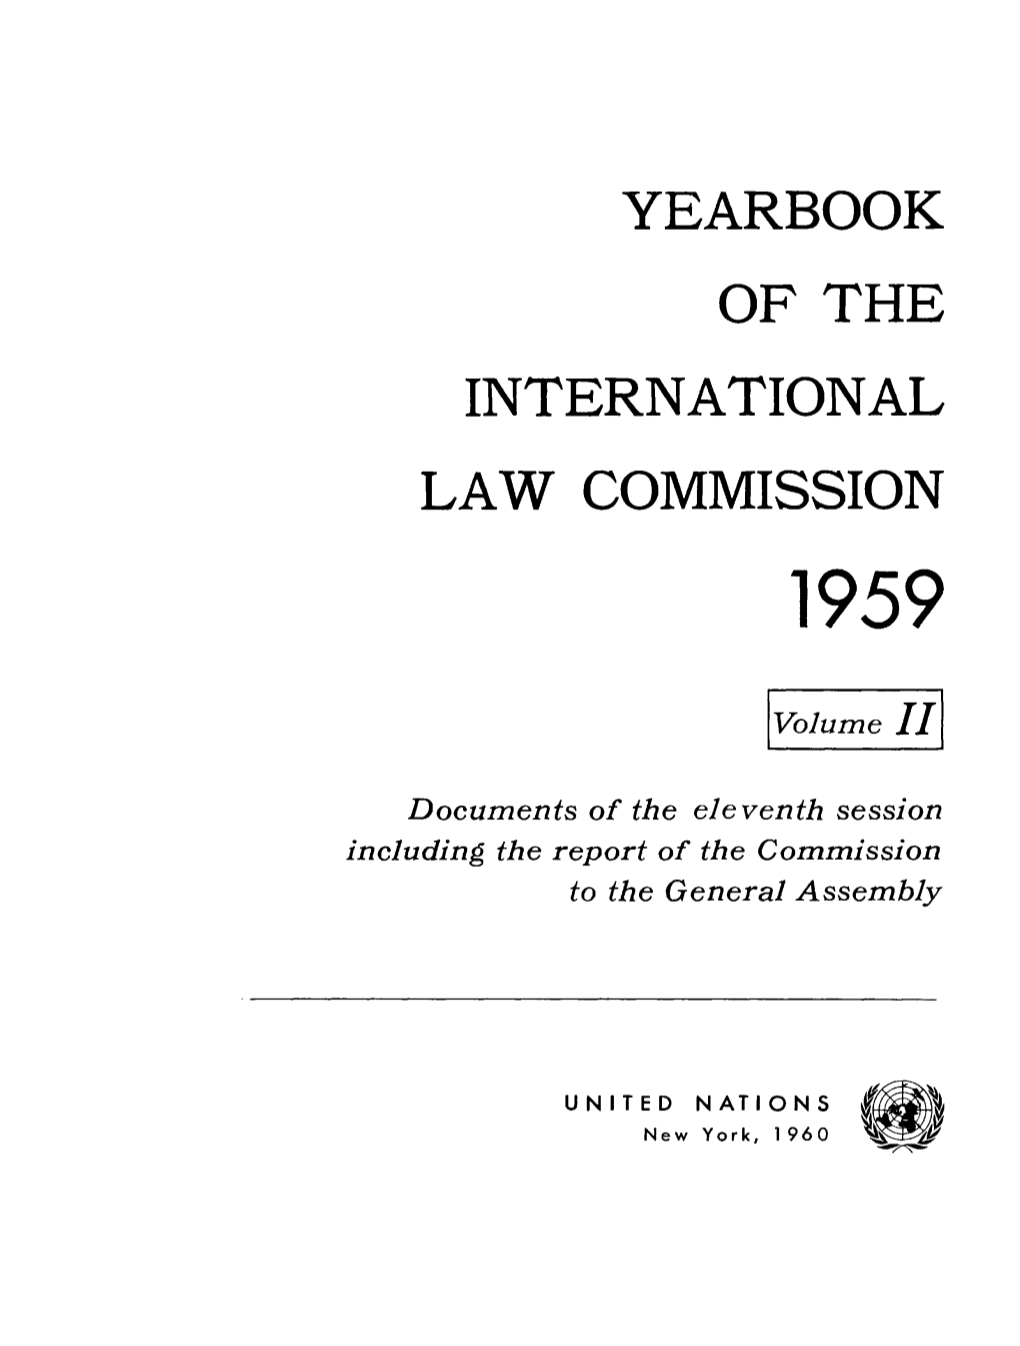 Yearbook of the International Law Commission 1959 Volume II